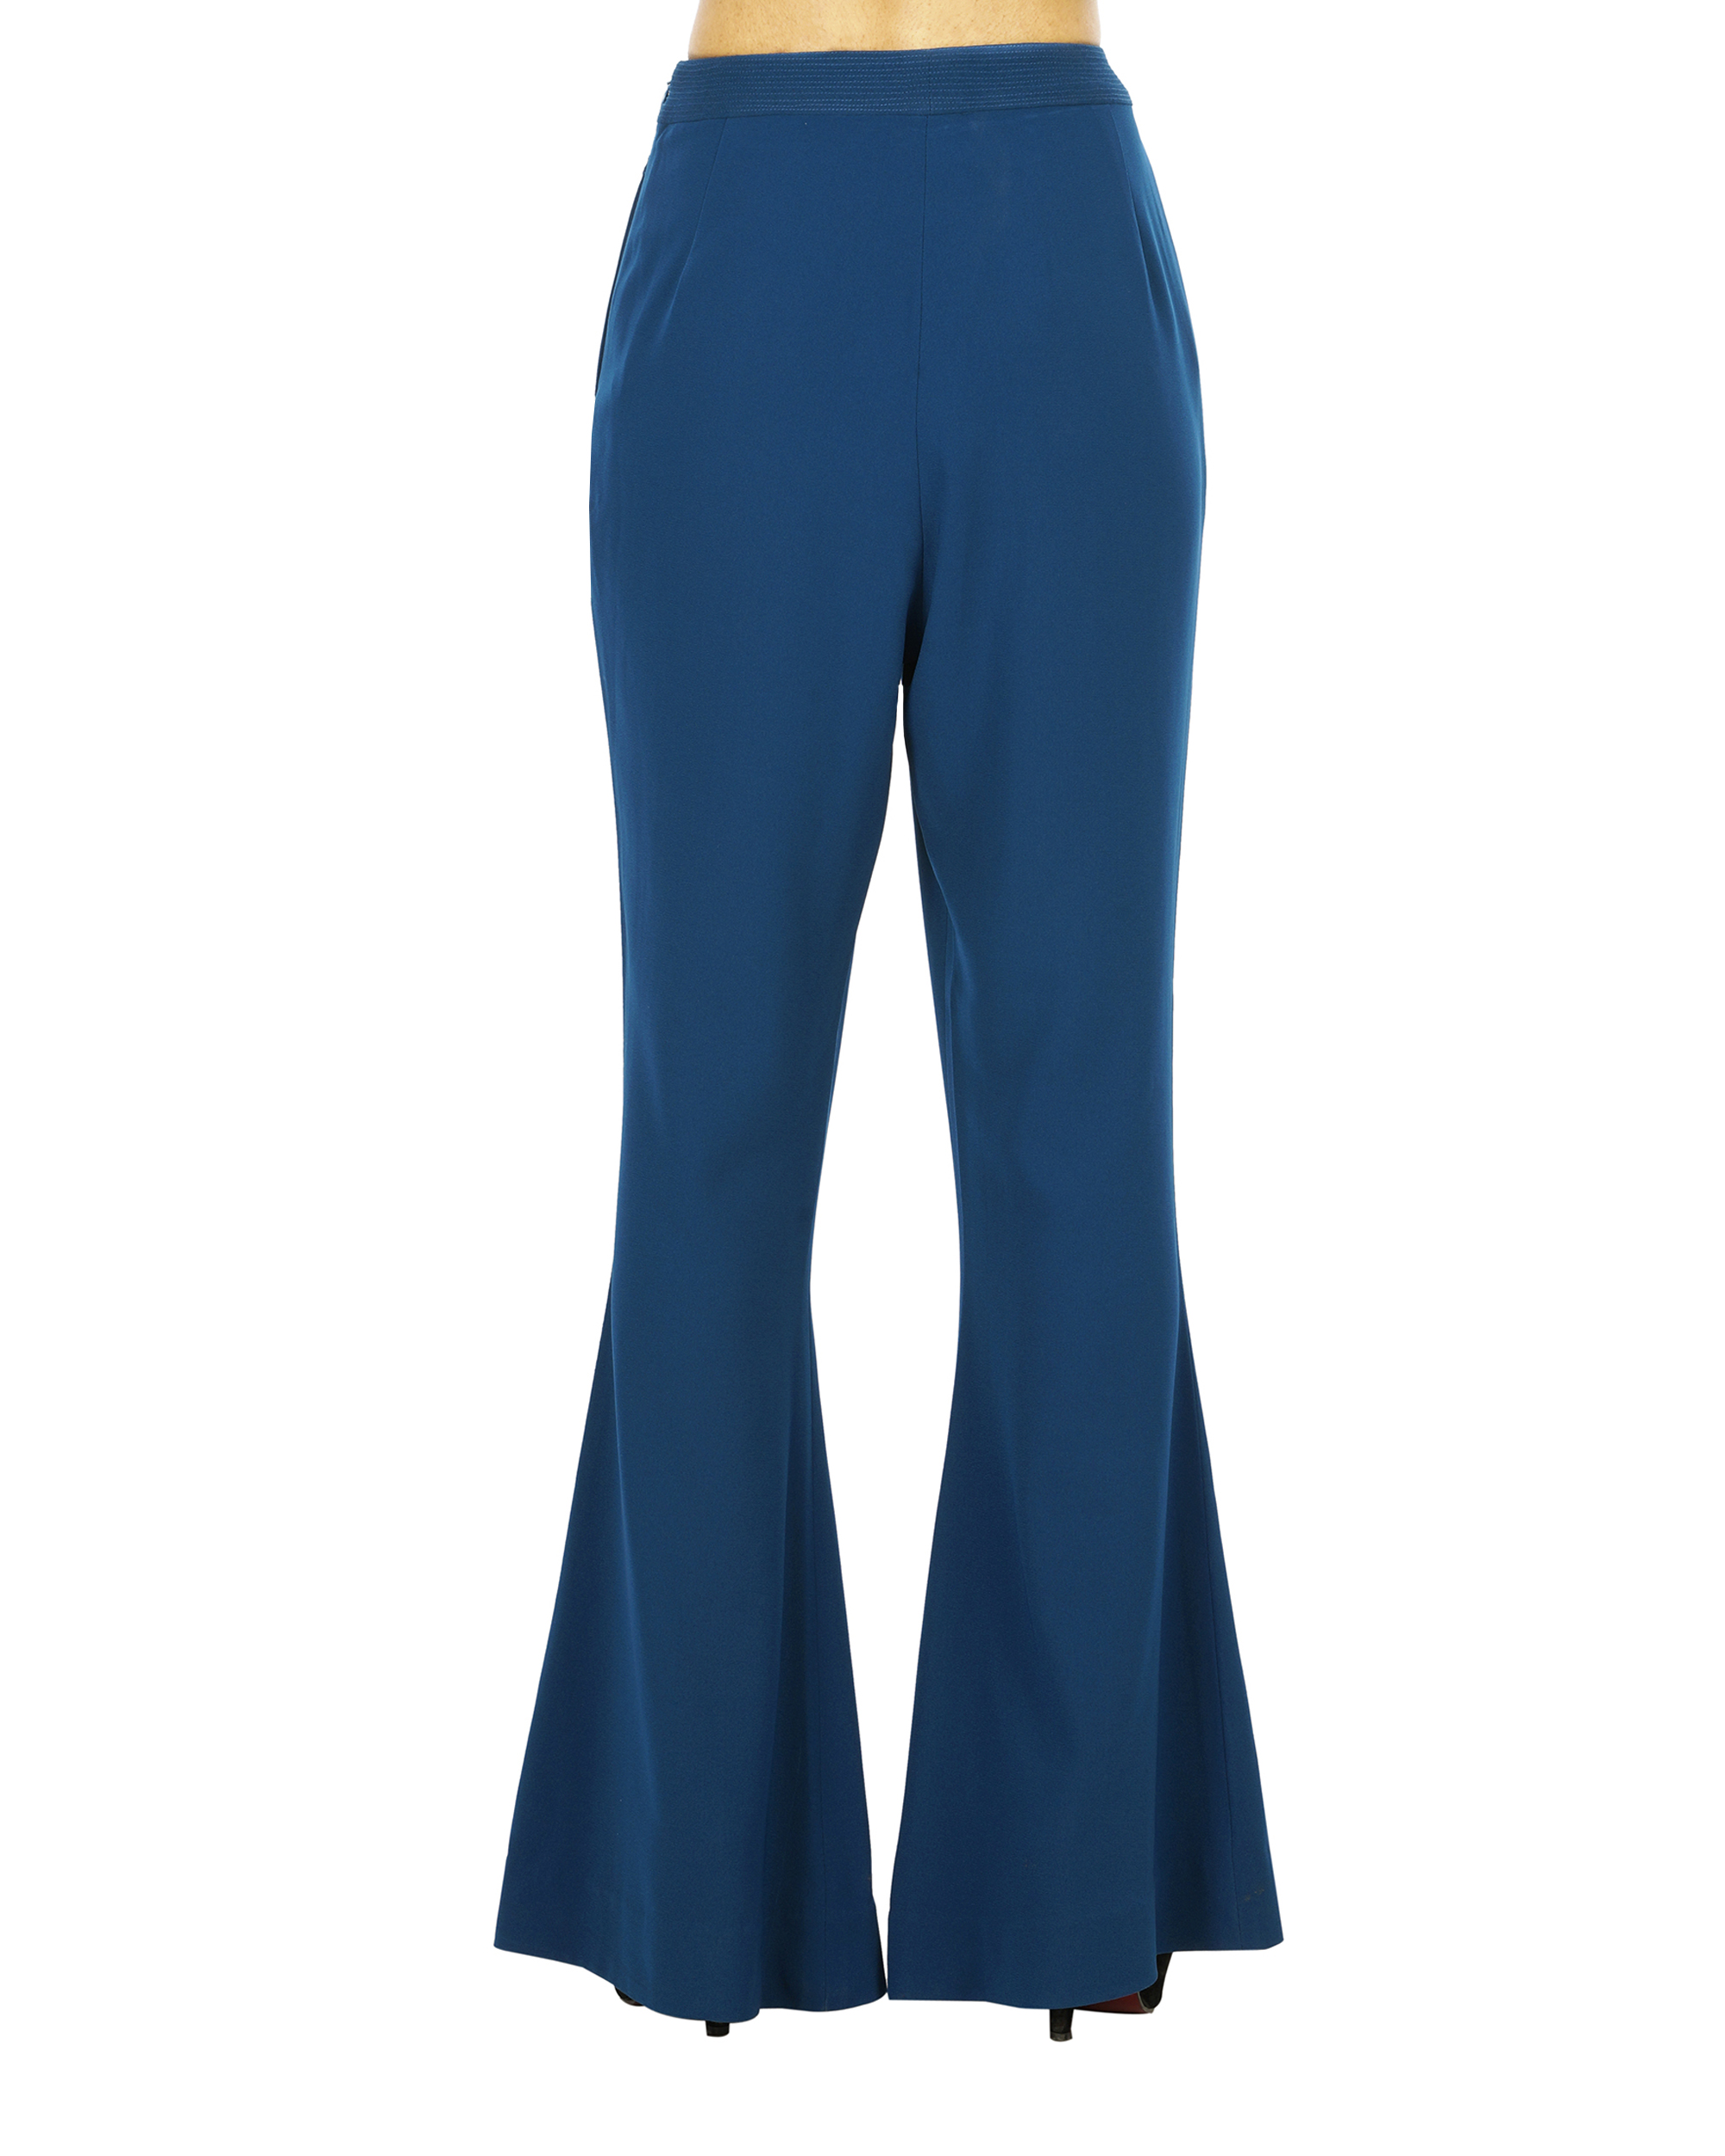 Celestial blue flared trousers by QUO by Ishita Mangal | The Secret Label